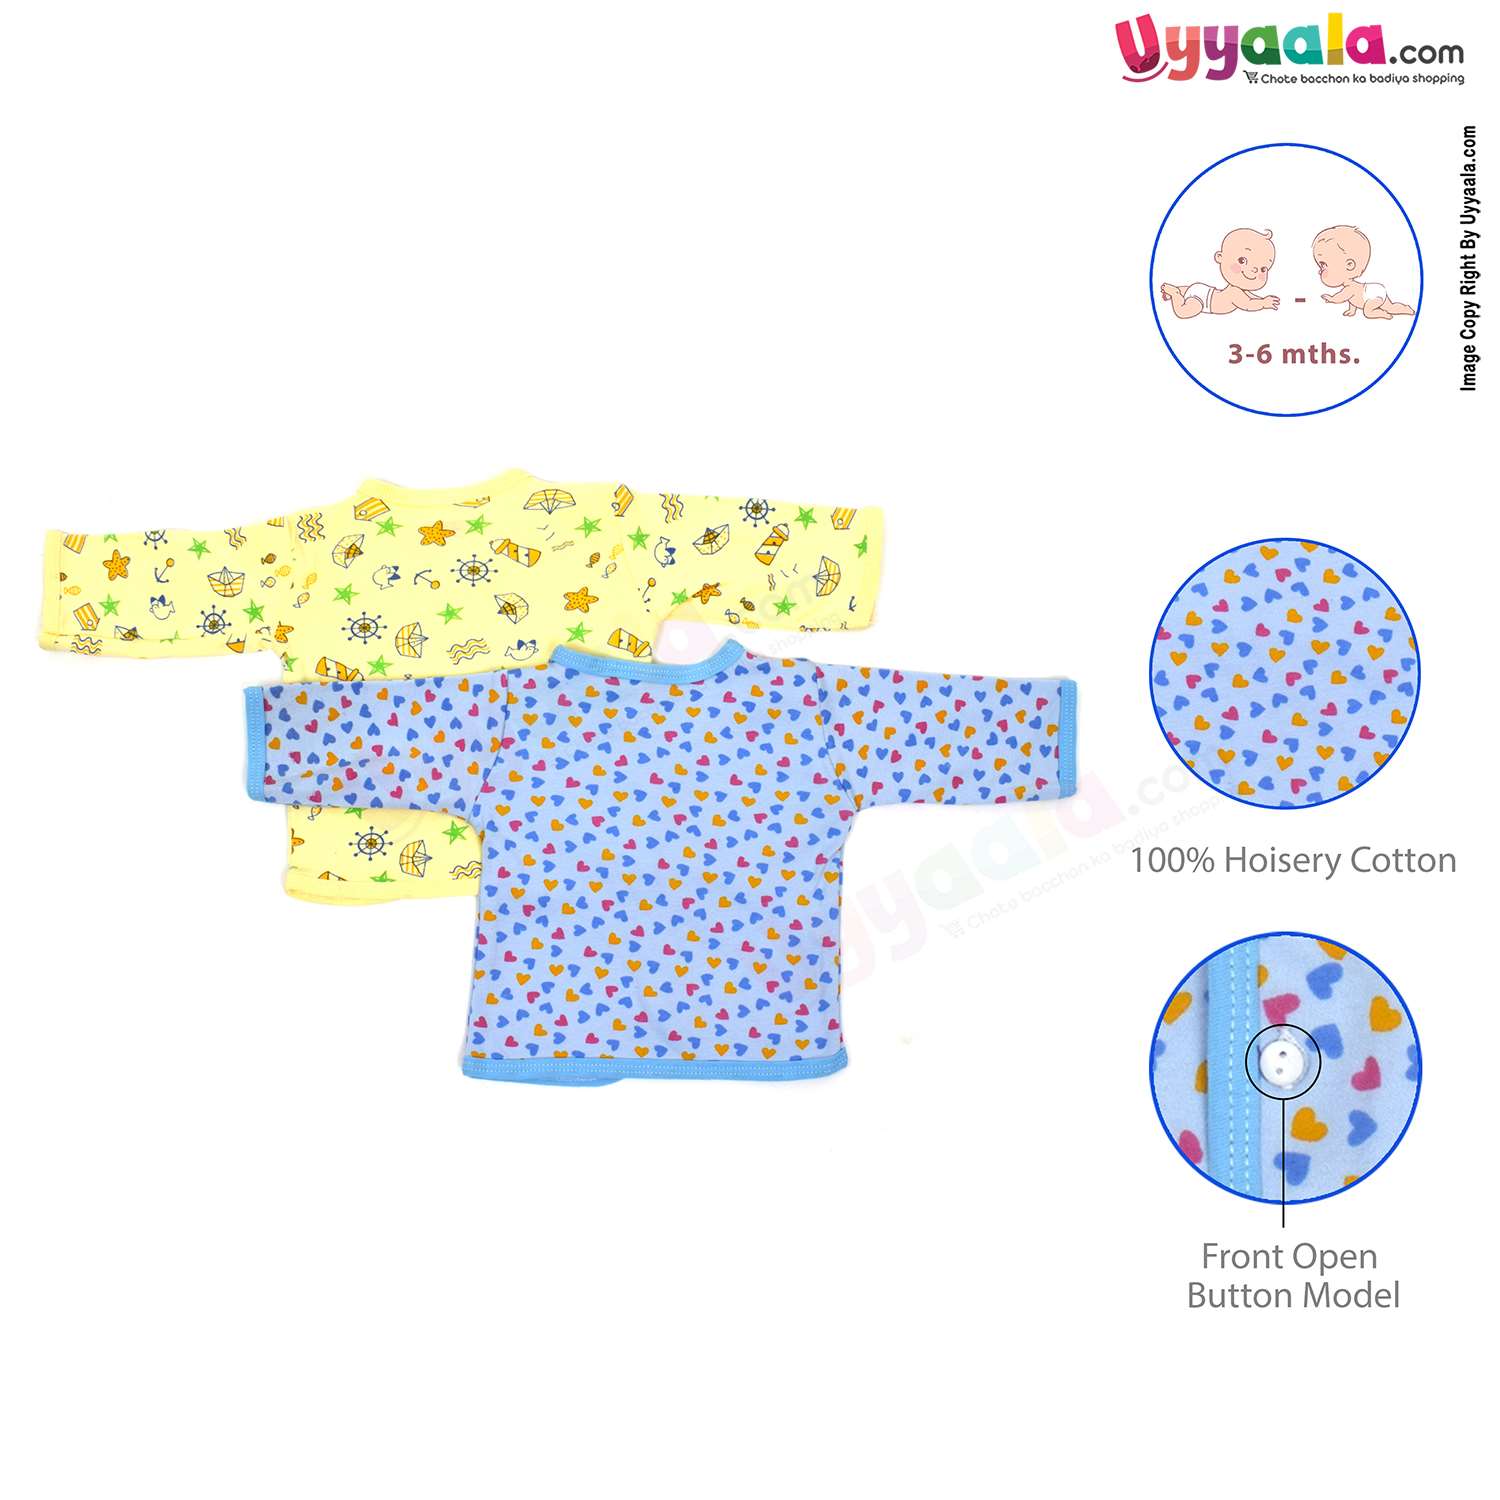 Mothers choice full sleeves front open jablas, 100% hosiery cotton, Pack of 2 (3-6M) - yellow & blue with assorted print